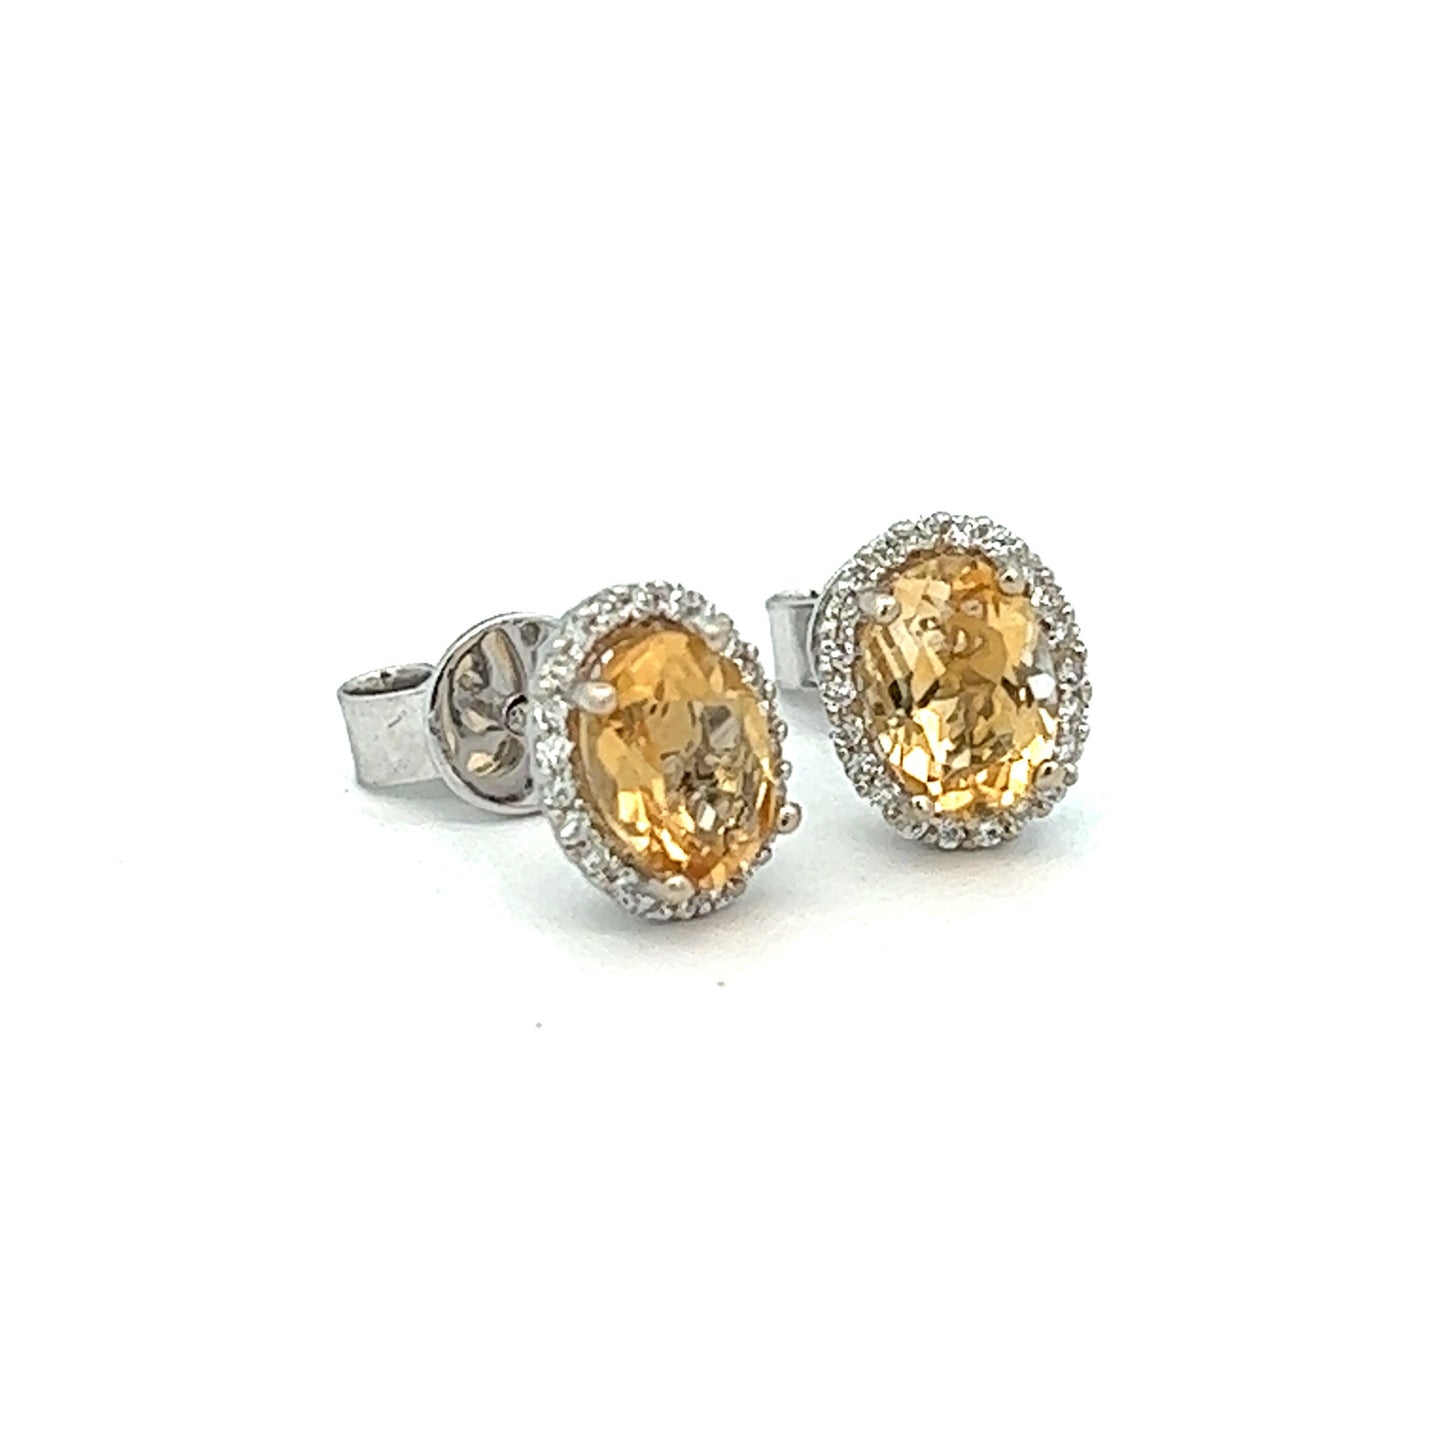 1.5ct Yellow Sapphire Earrings in 14k White Gold